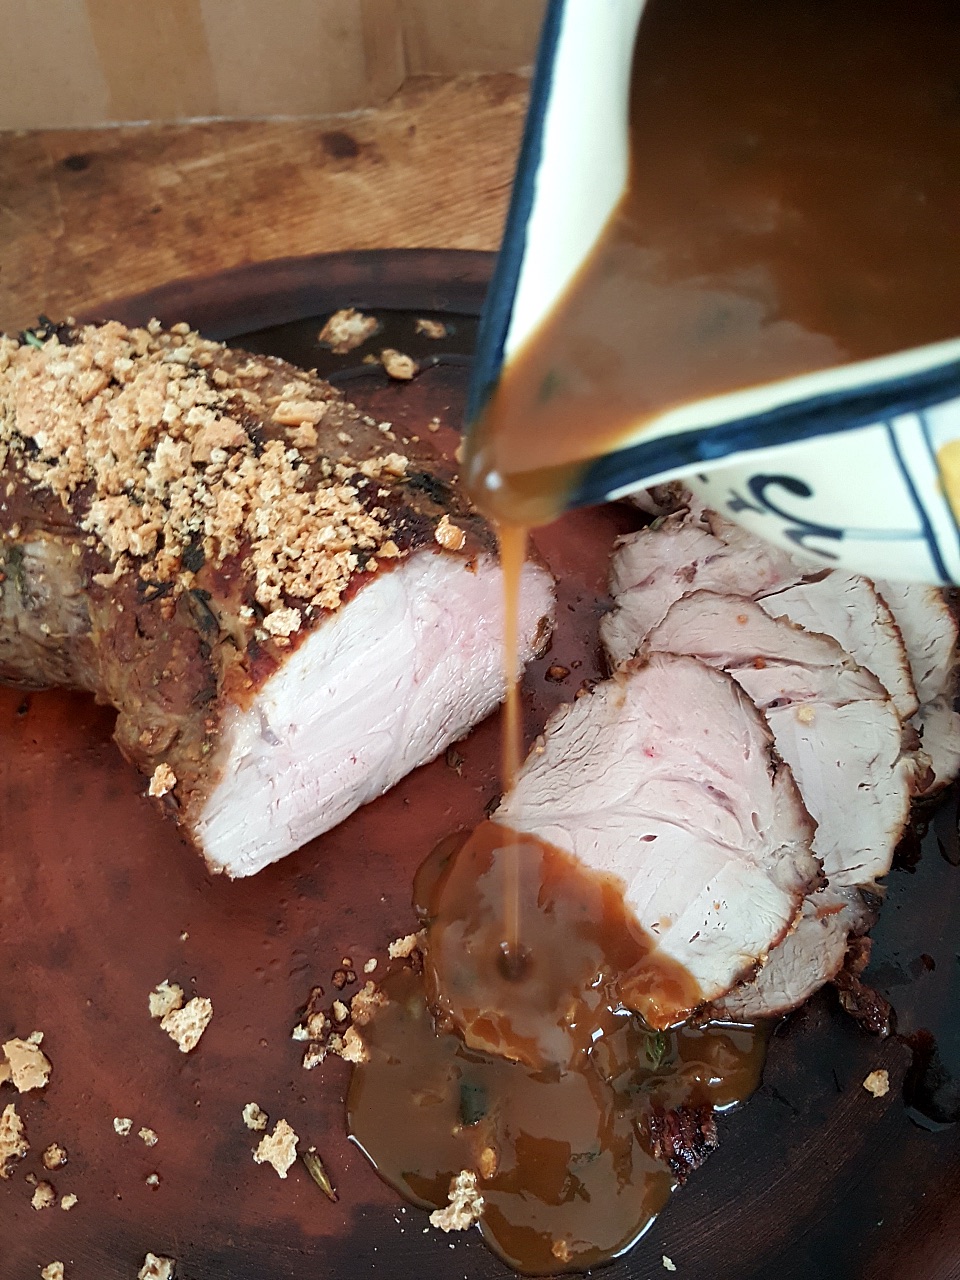 Roasted Pork Scotch Fillet with Amaretti Crumbs